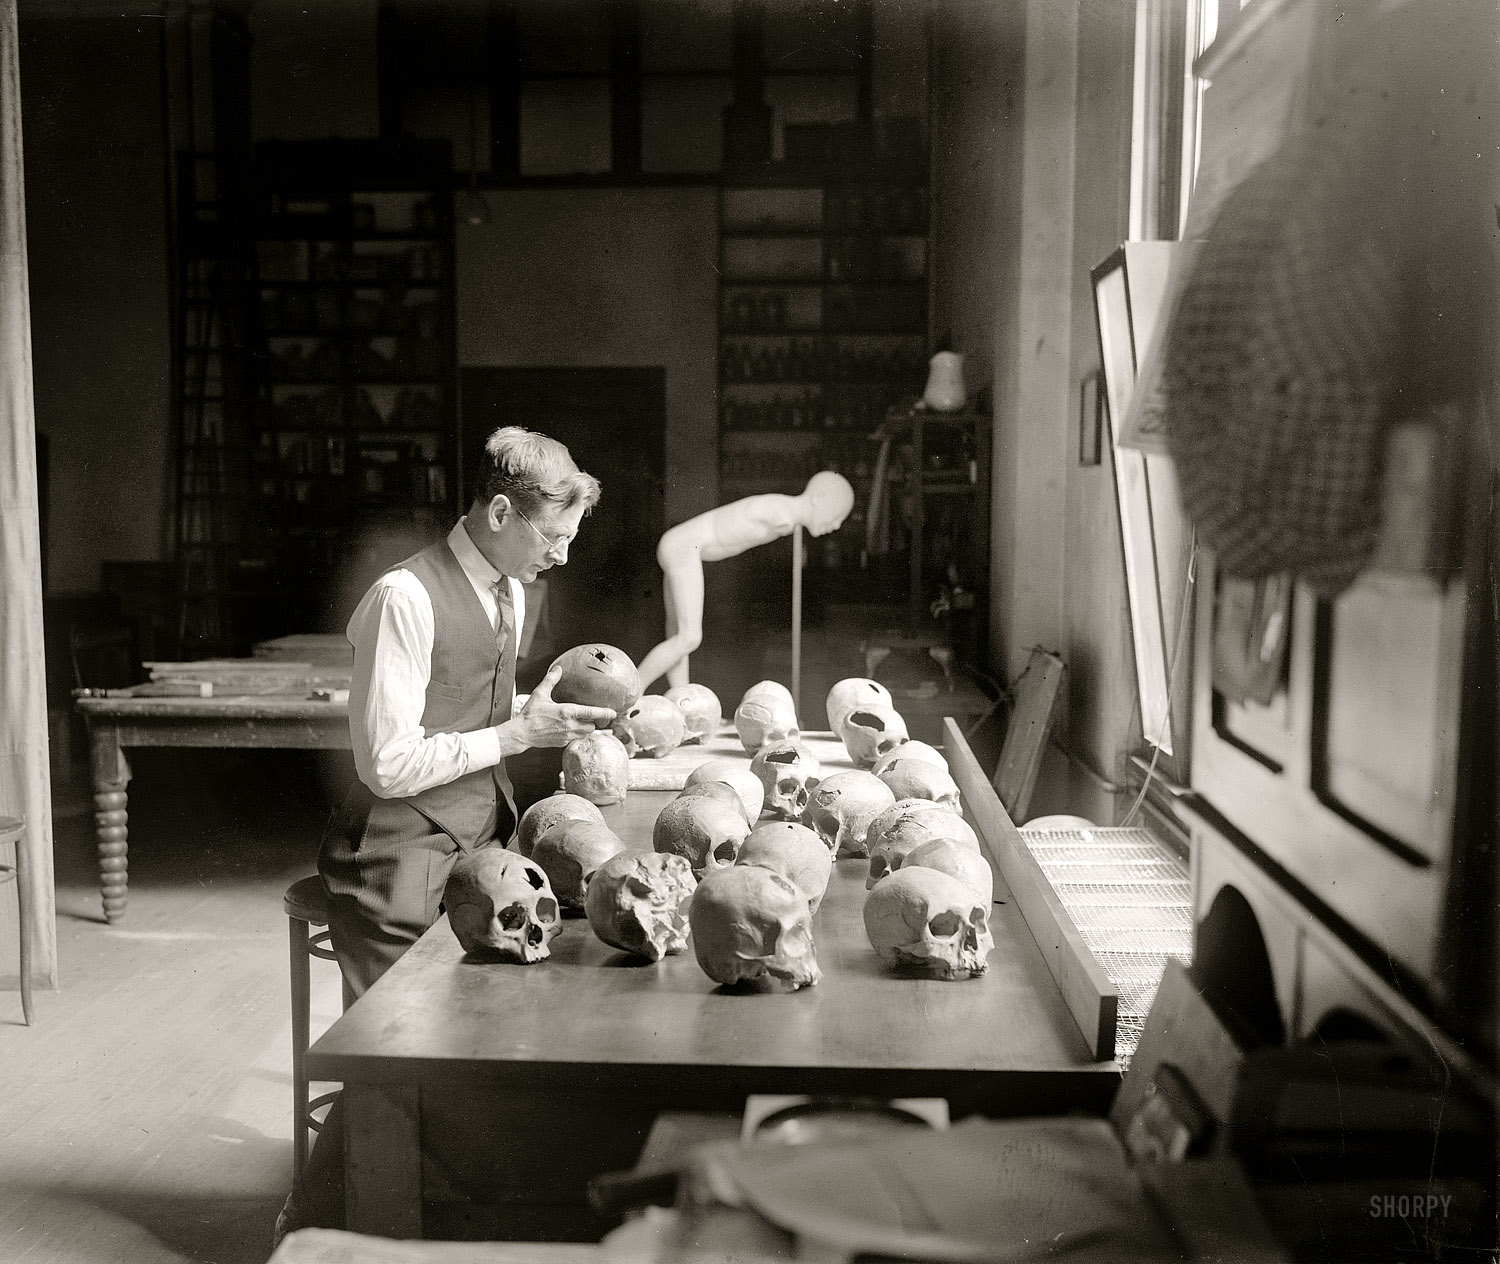 March 27, 1926. "William H. Egberts examining trepanned skulls in the anthropology laboratory at the National Museum. The crude method of trephining with the sharpened edge of a stone practiced by peoples living in Peru some 500 or 600 years ago is revealed." National Photo Co. View full size.